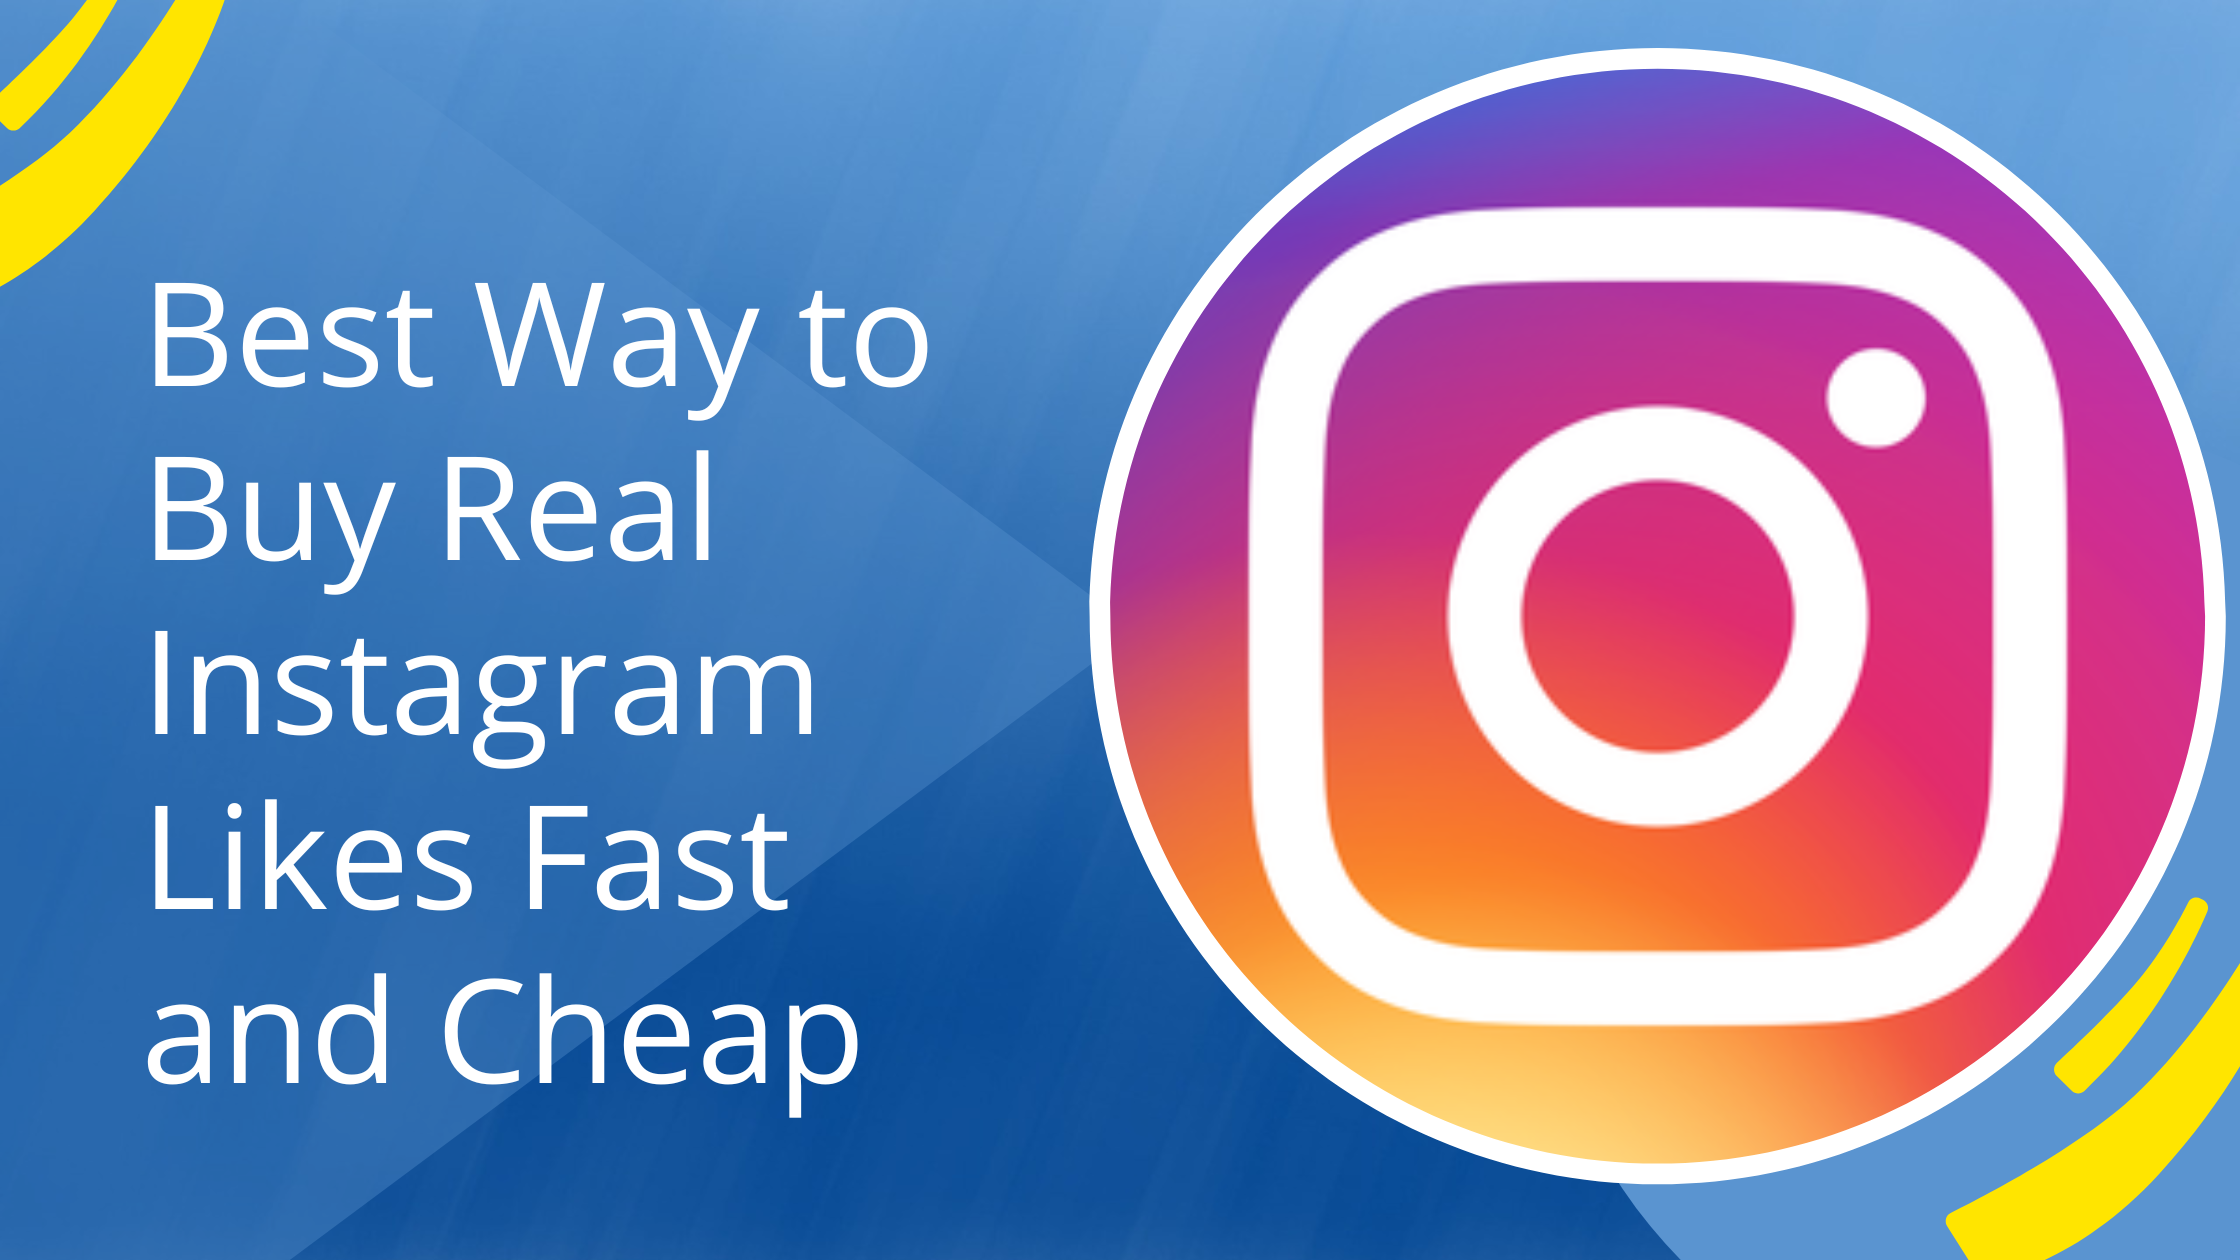 Best Way to Buy Real Instagram Likes Fast and Cheap